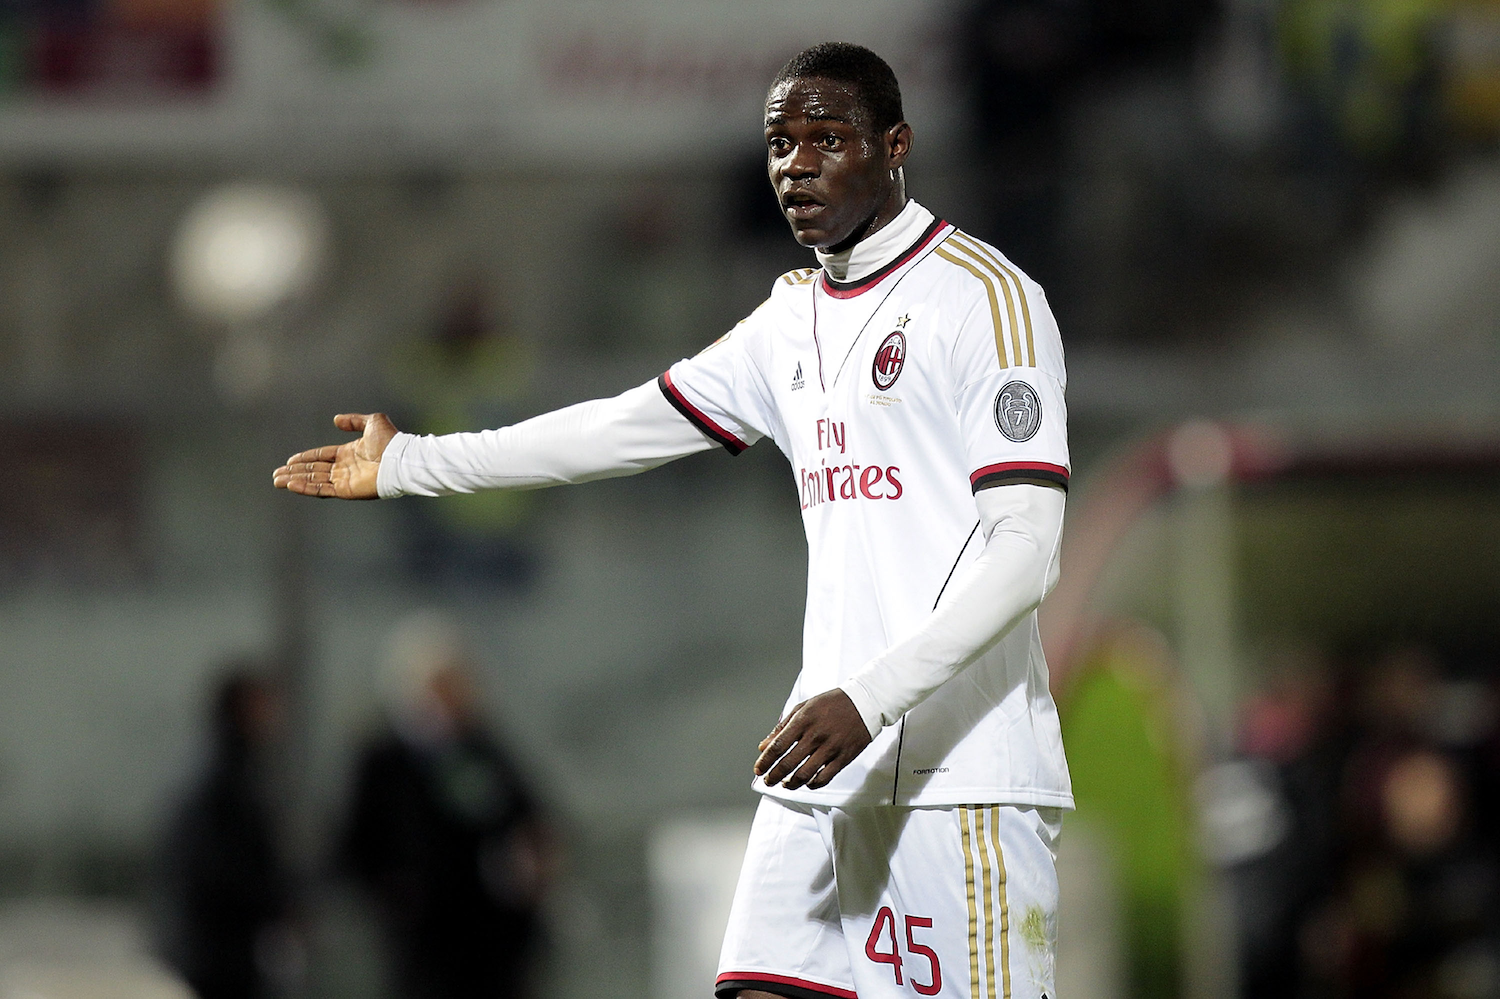 Balotelli lining up for Milan in his first spell (Photo by Gabriele Maltinti/Getty Images)